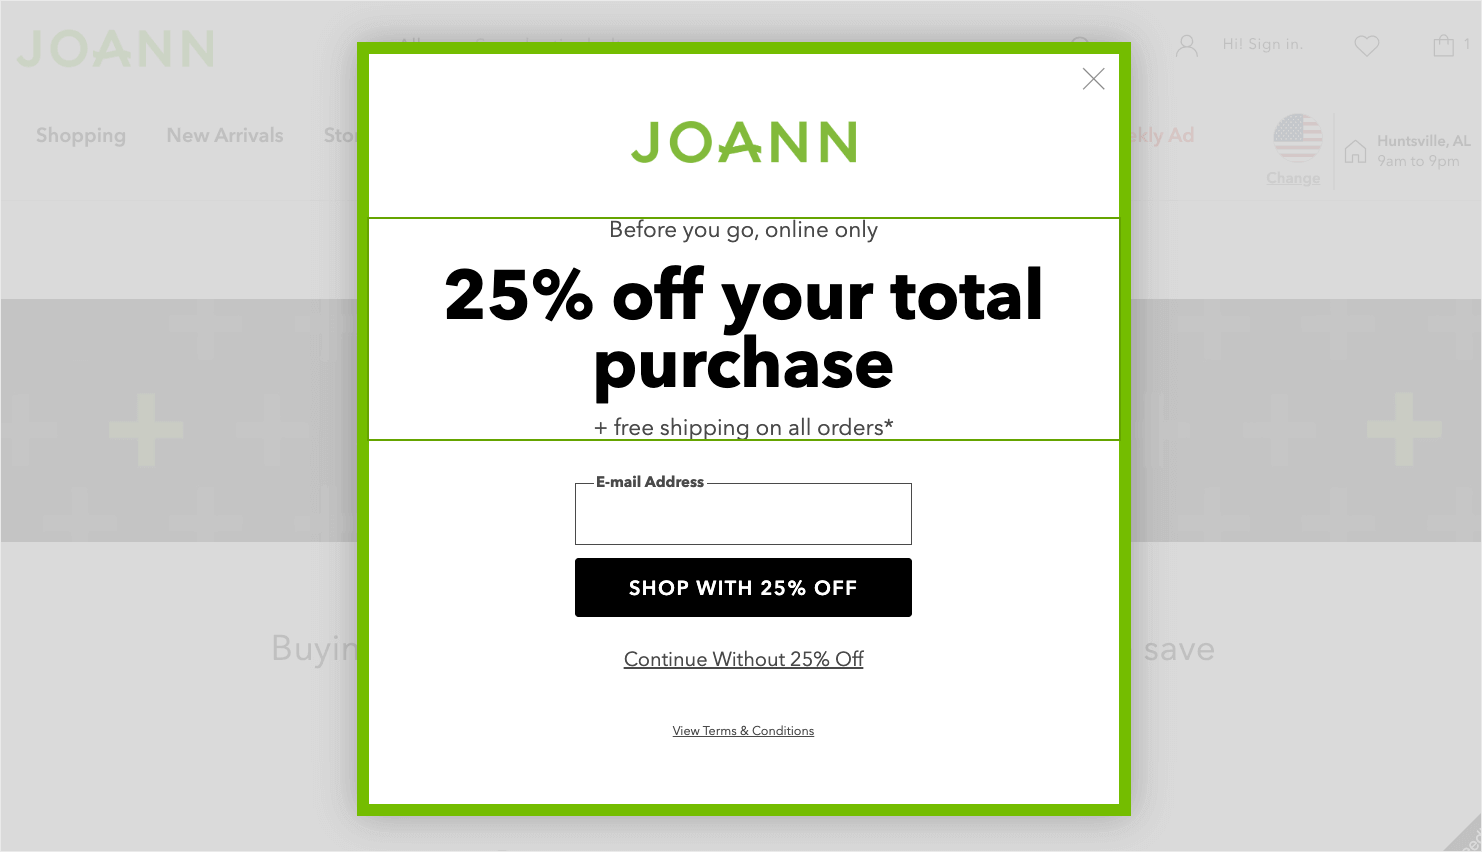 Exit popup example from Joann: "Before you go, online only. 25% off your total purchase + free shipping on all orders" There's a field for an email address. CTA button says "Shop with 25% Off." Linked text below says "Continue without 25% off"